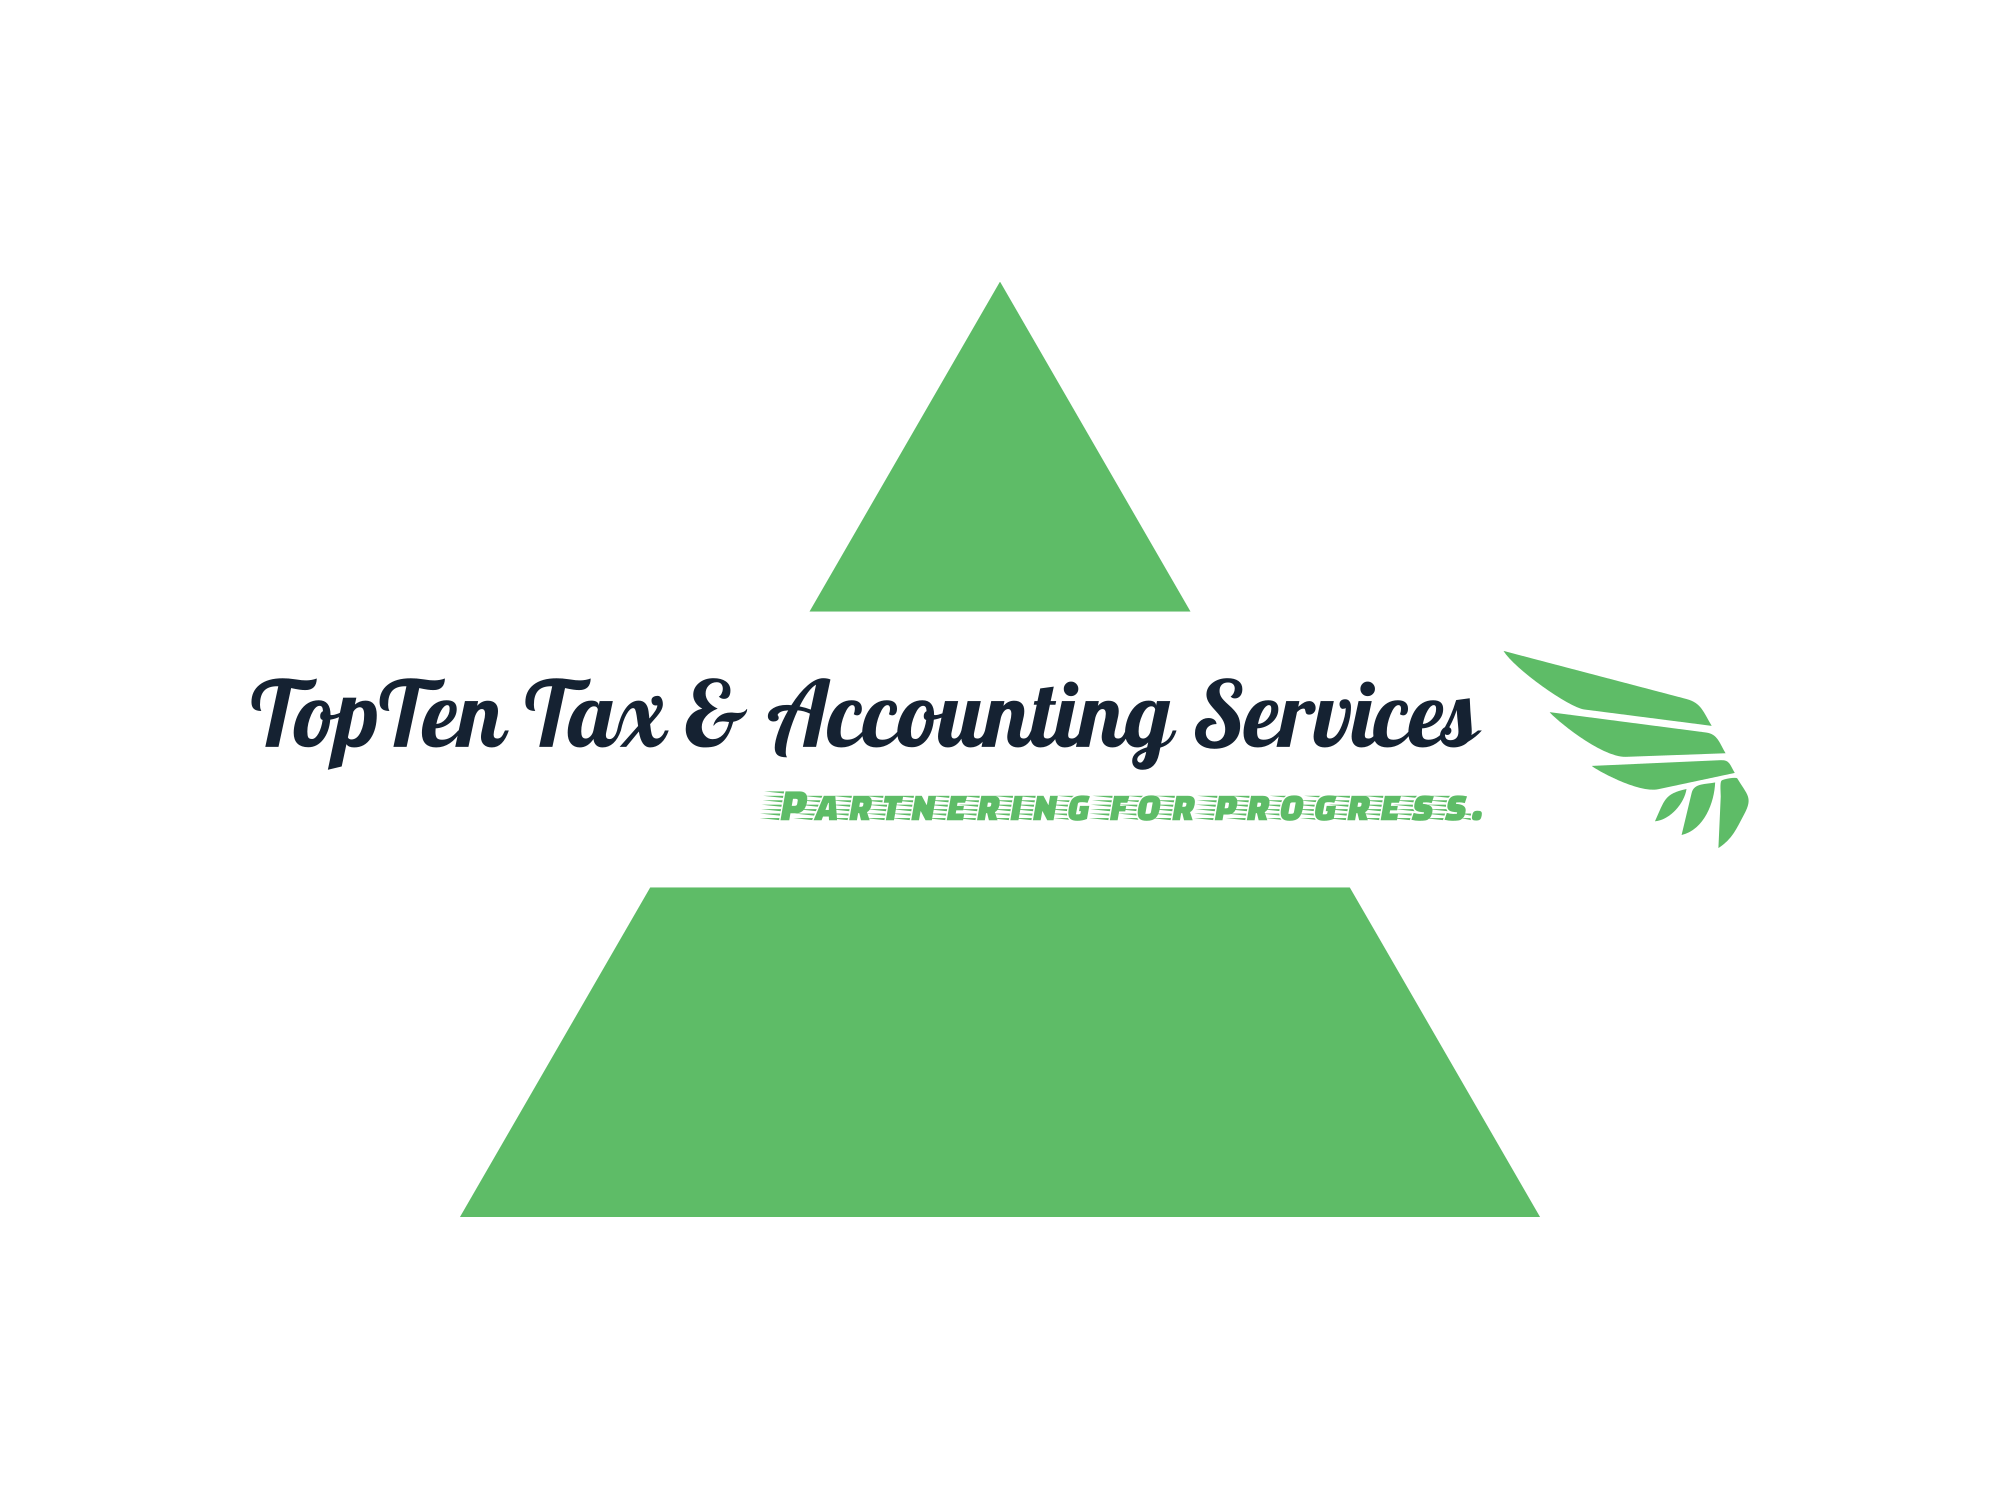 TopTen Tax & Accounting Services